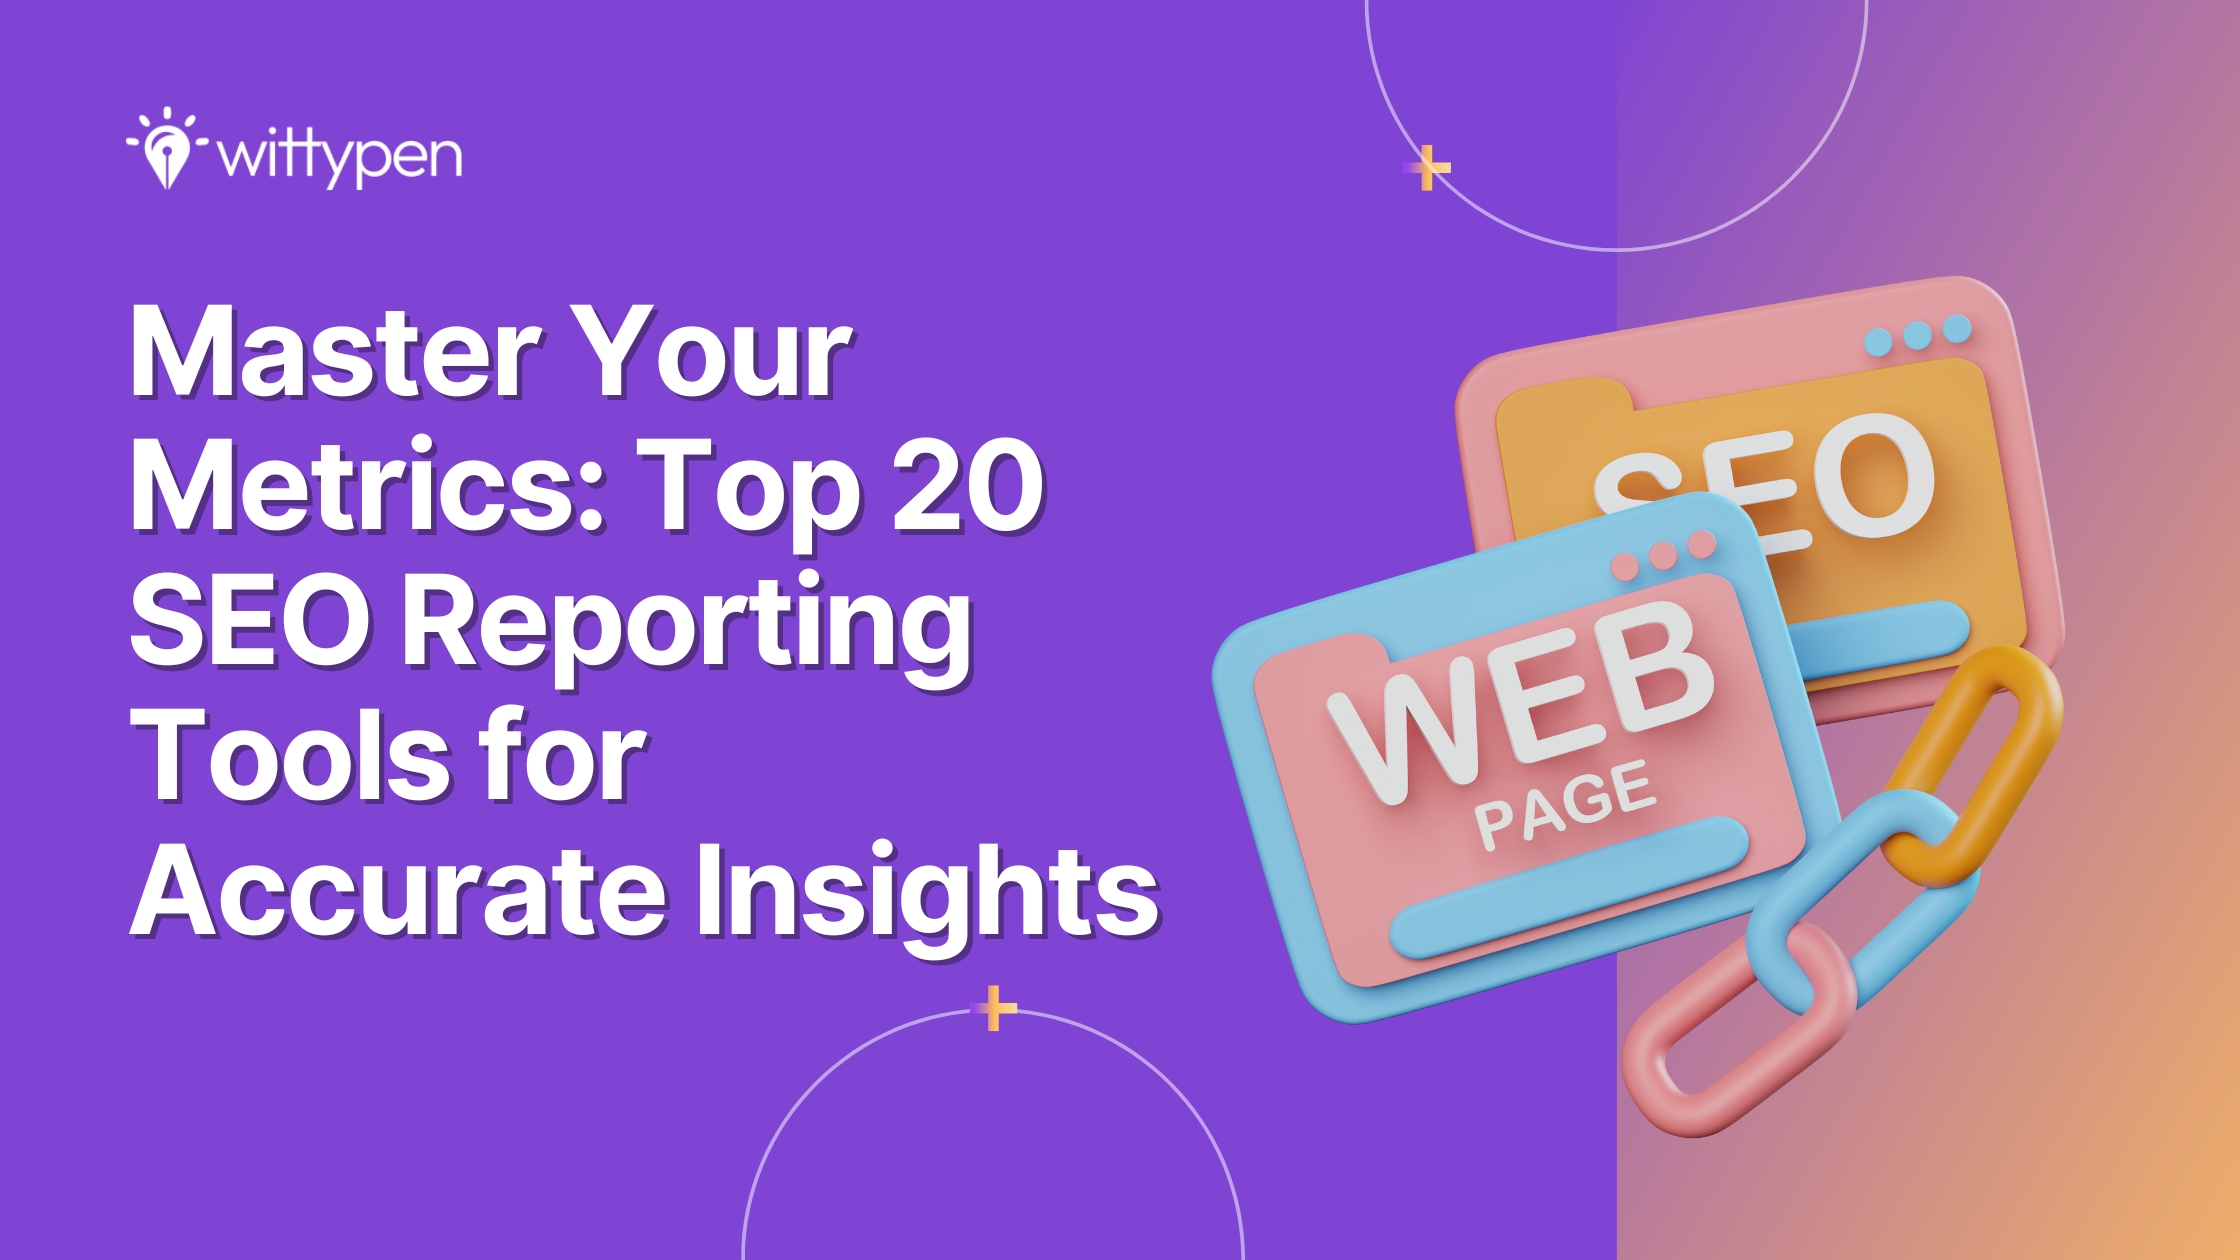 Master Your Metrics: Top 20 SEO Reporting Tools for Accurate Insights